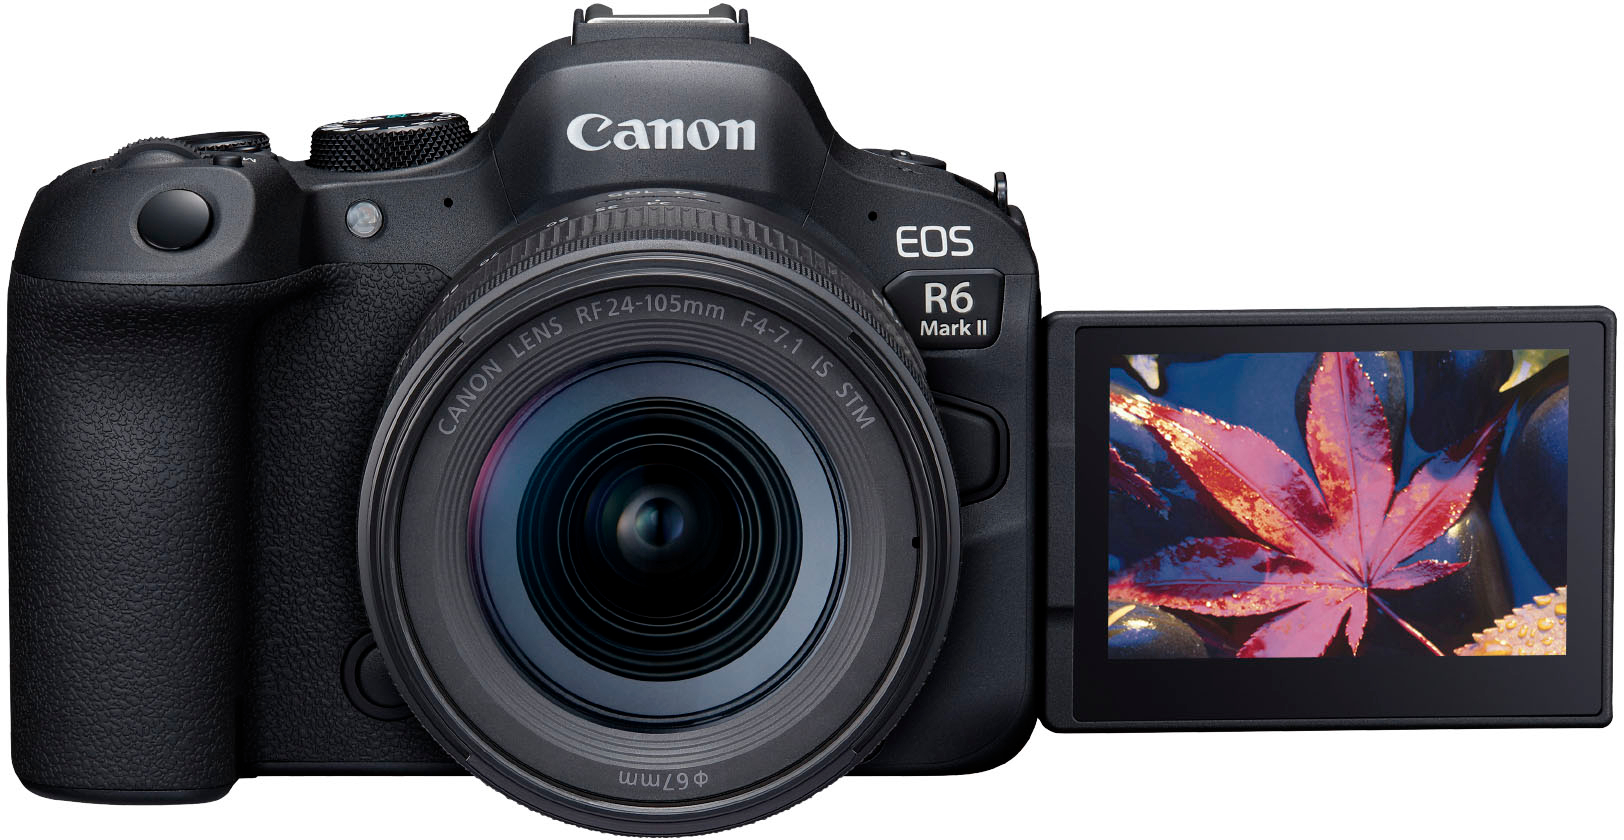 EOS R6 Mark II, a 6ameChanger for Videos and Stills With 6K RAW